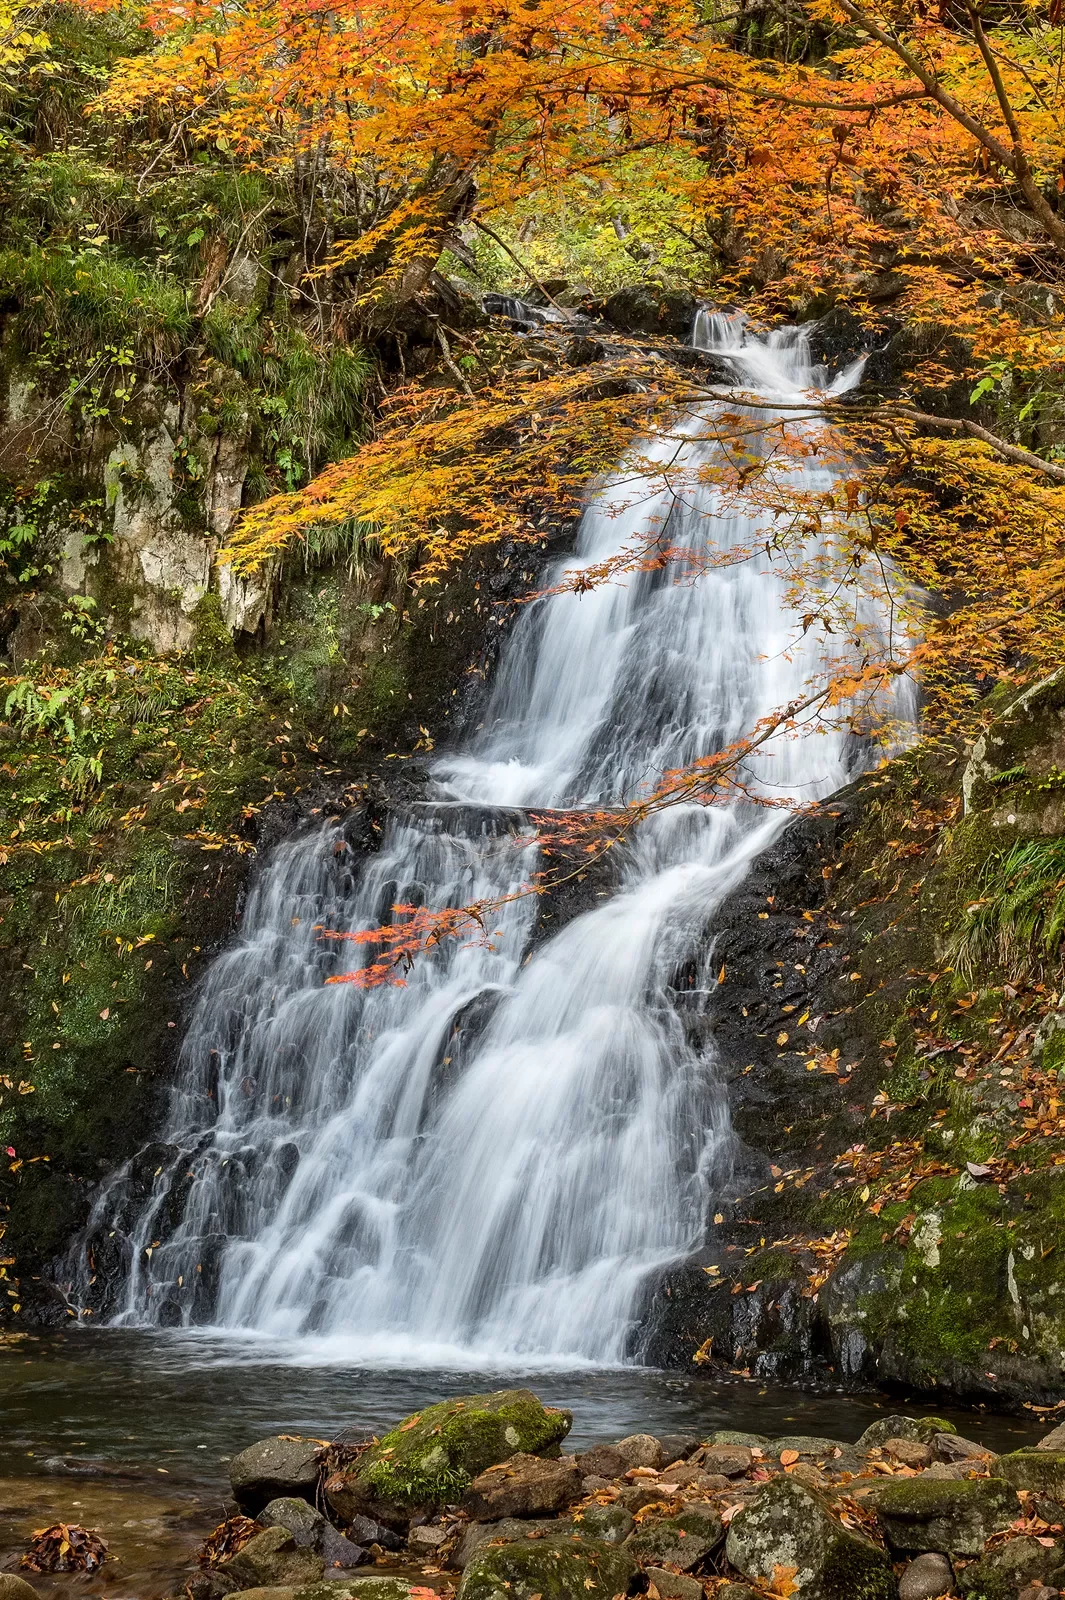 Waterfall flowing in a valley in Japan in the fall